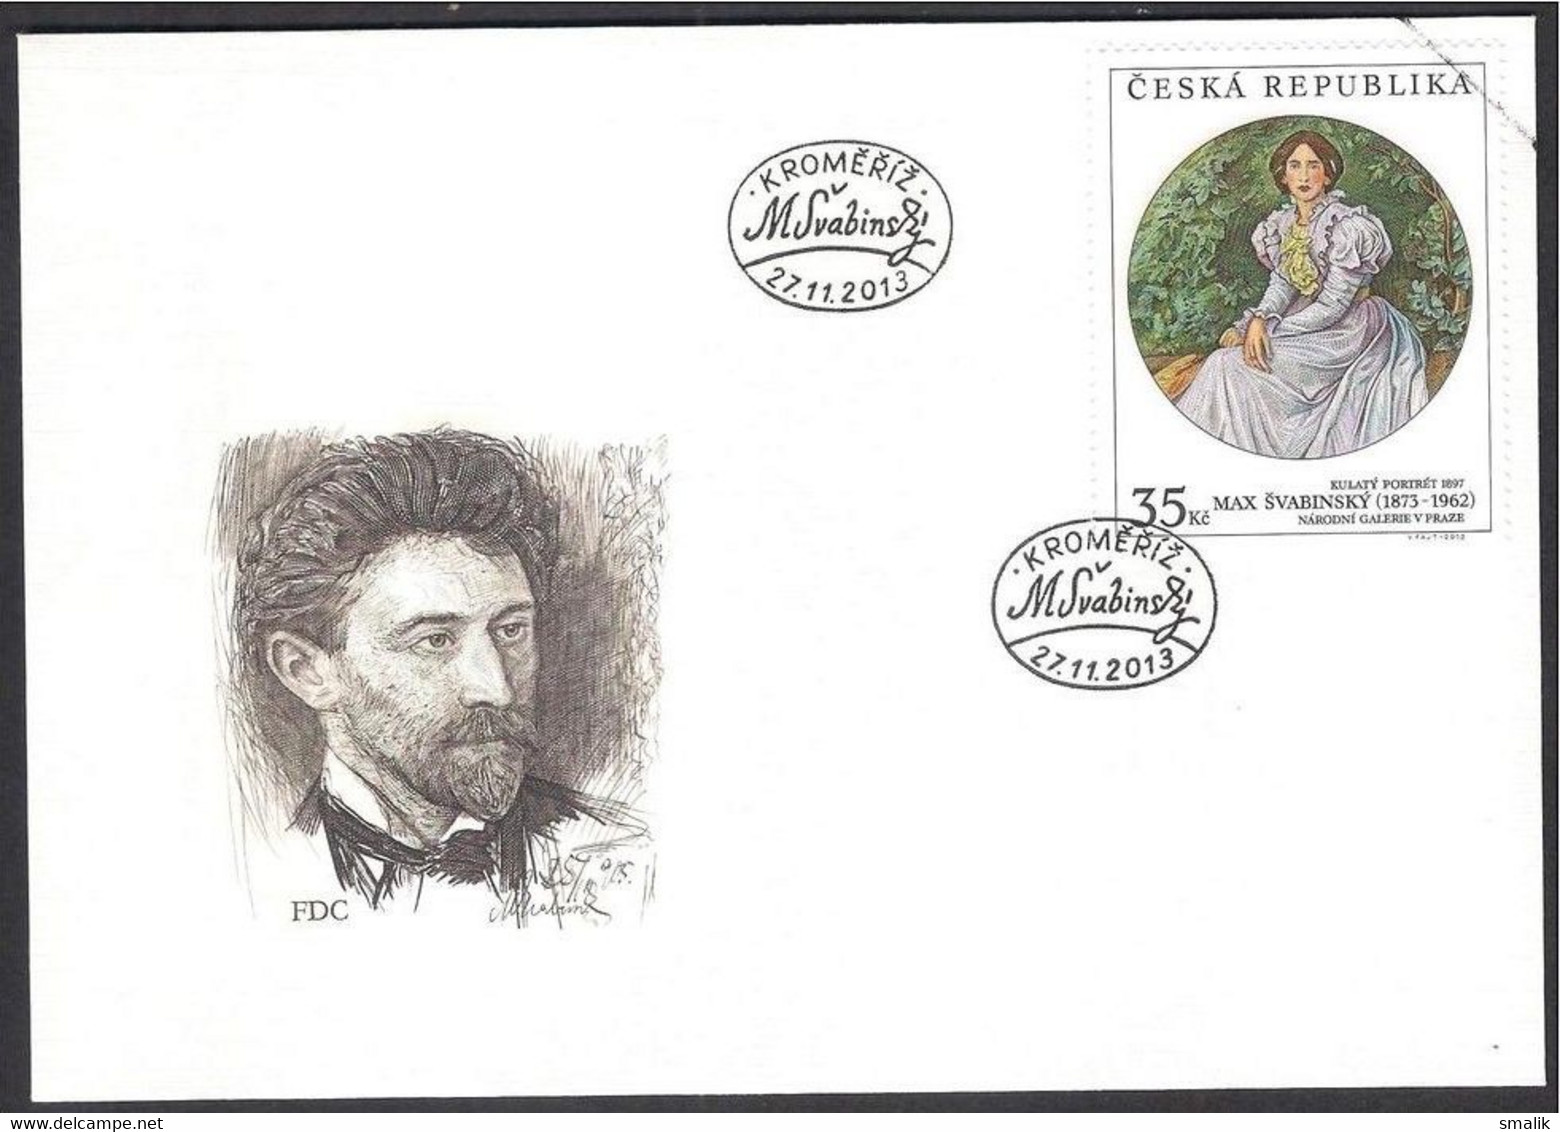 CZECH REPUBLIC 2013 FDC - Works Of Art, Round Portrait, First Day Cover - FDC